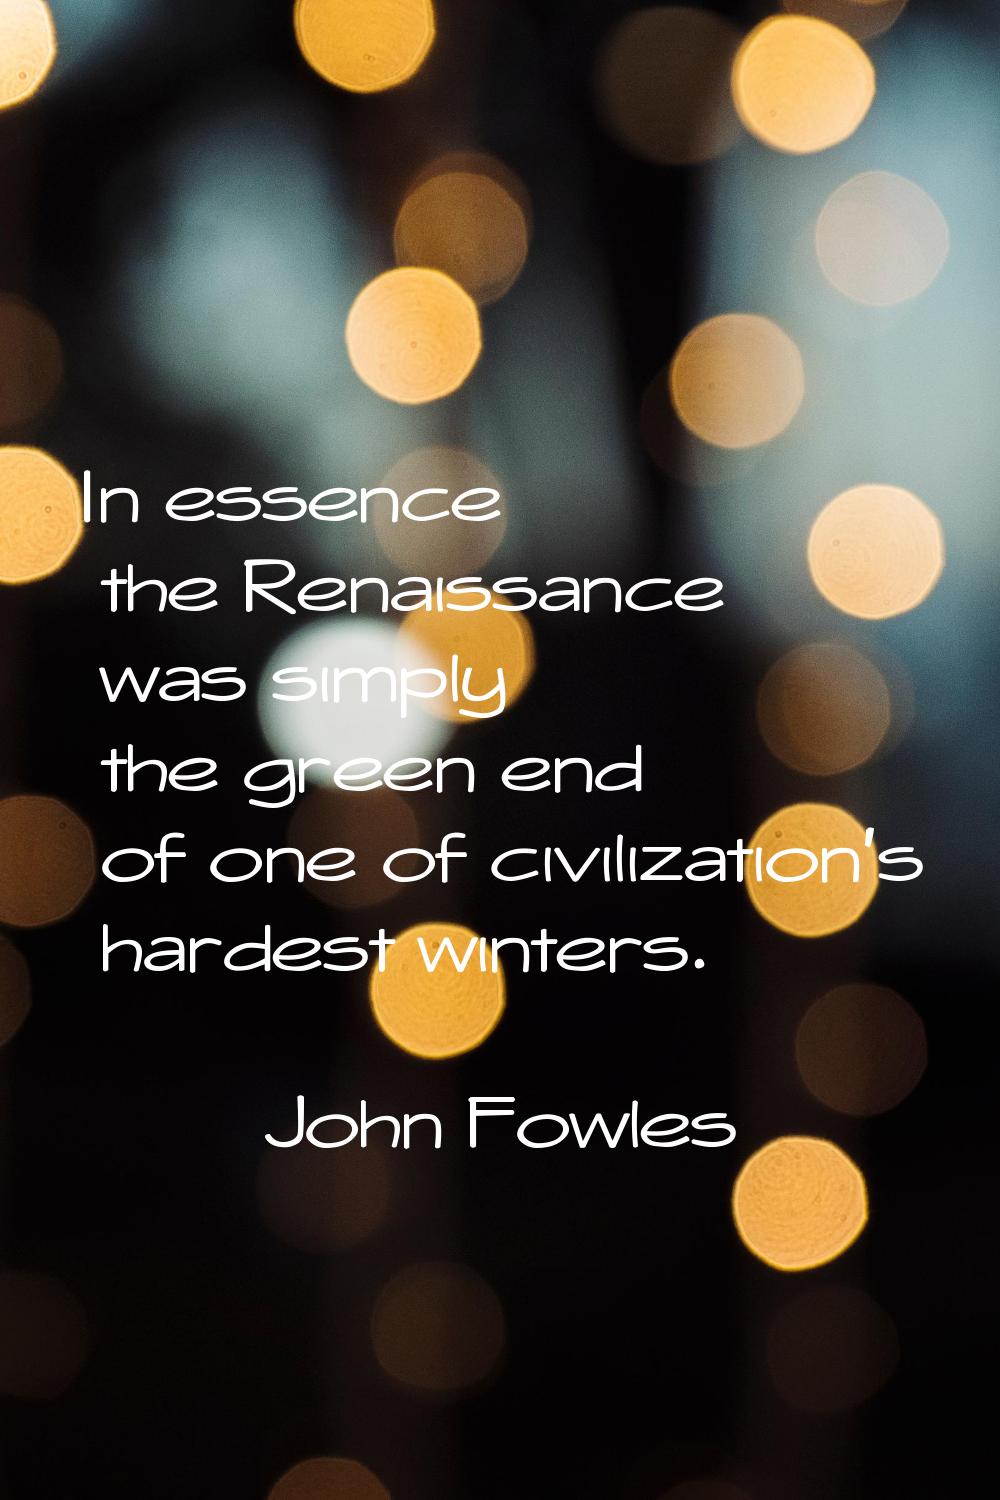 In essence the Renaissance was simply the green end of one of civilization's hardest winters.